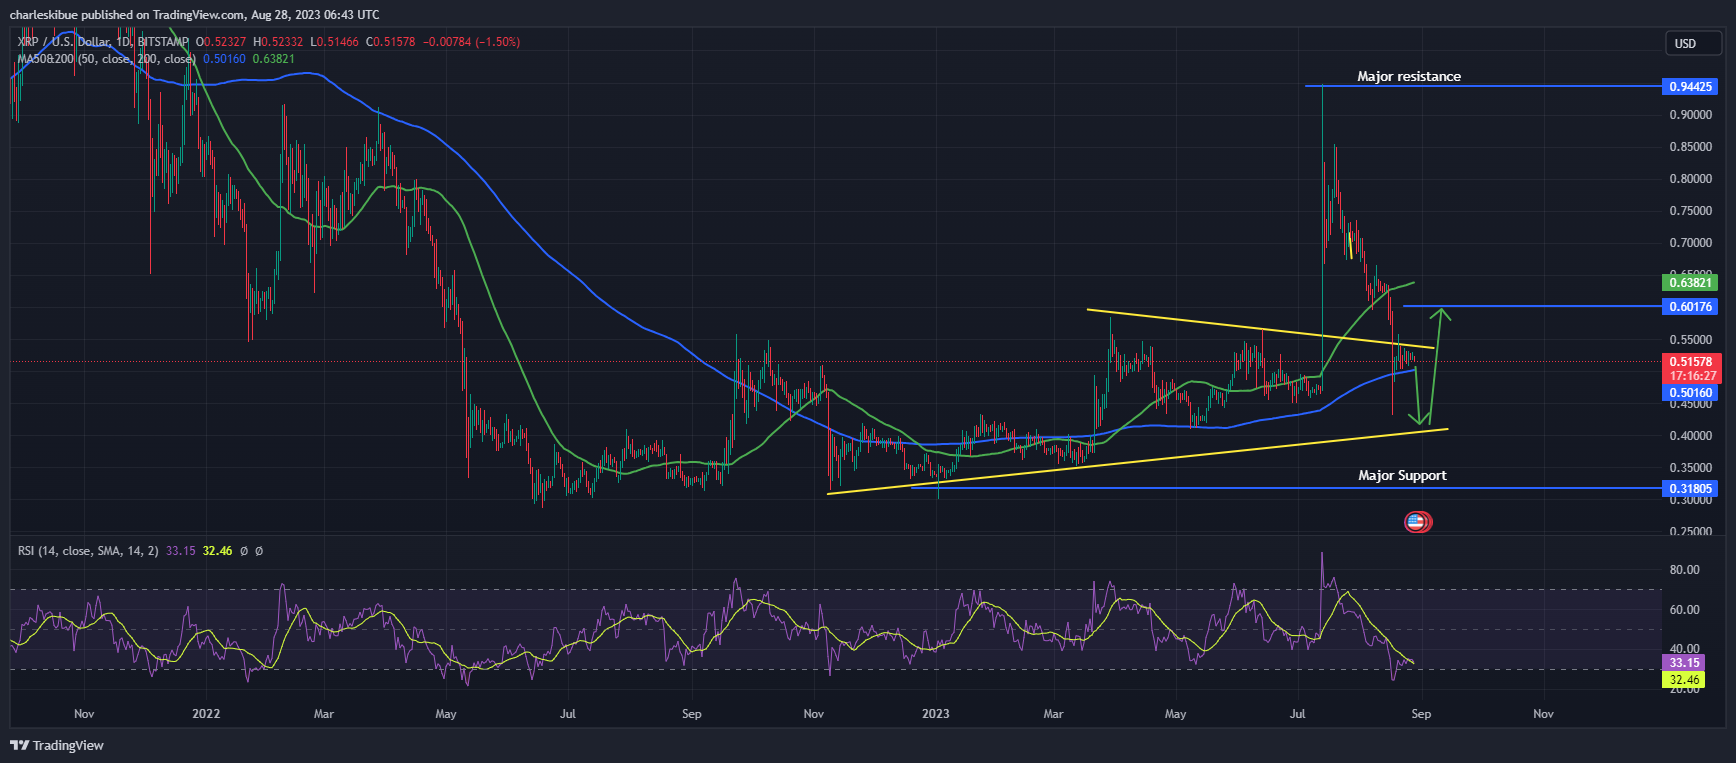 Ripple Price Prediction: XRP Breaches $0.52 – Whales or Retail Fueling the Rally?